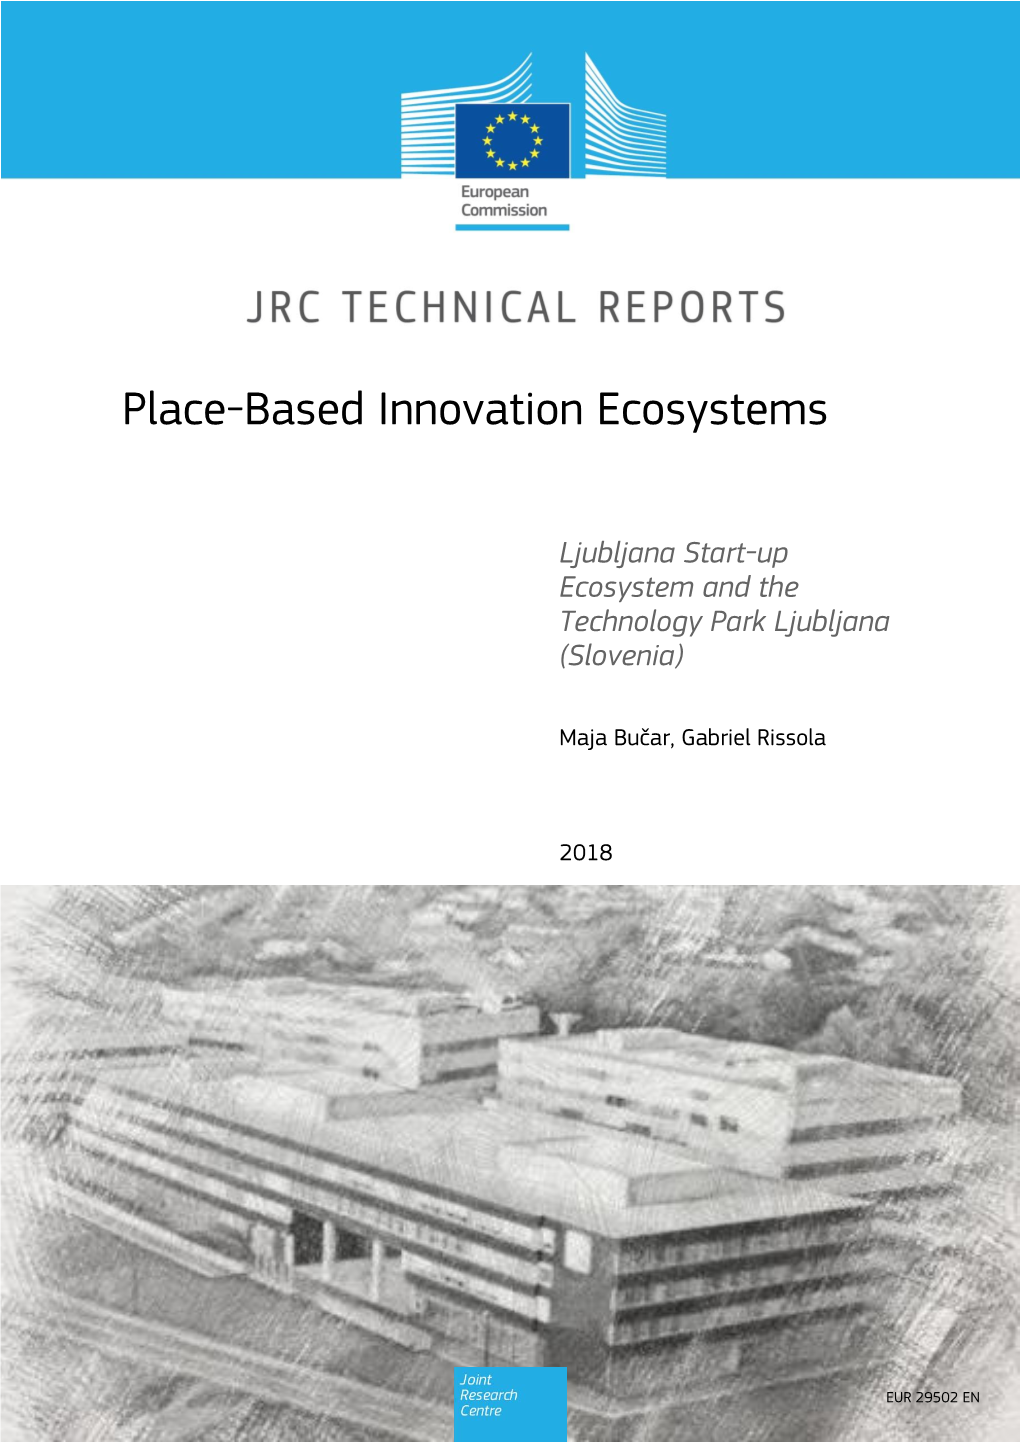 Place-Based Innovation Ecosystems